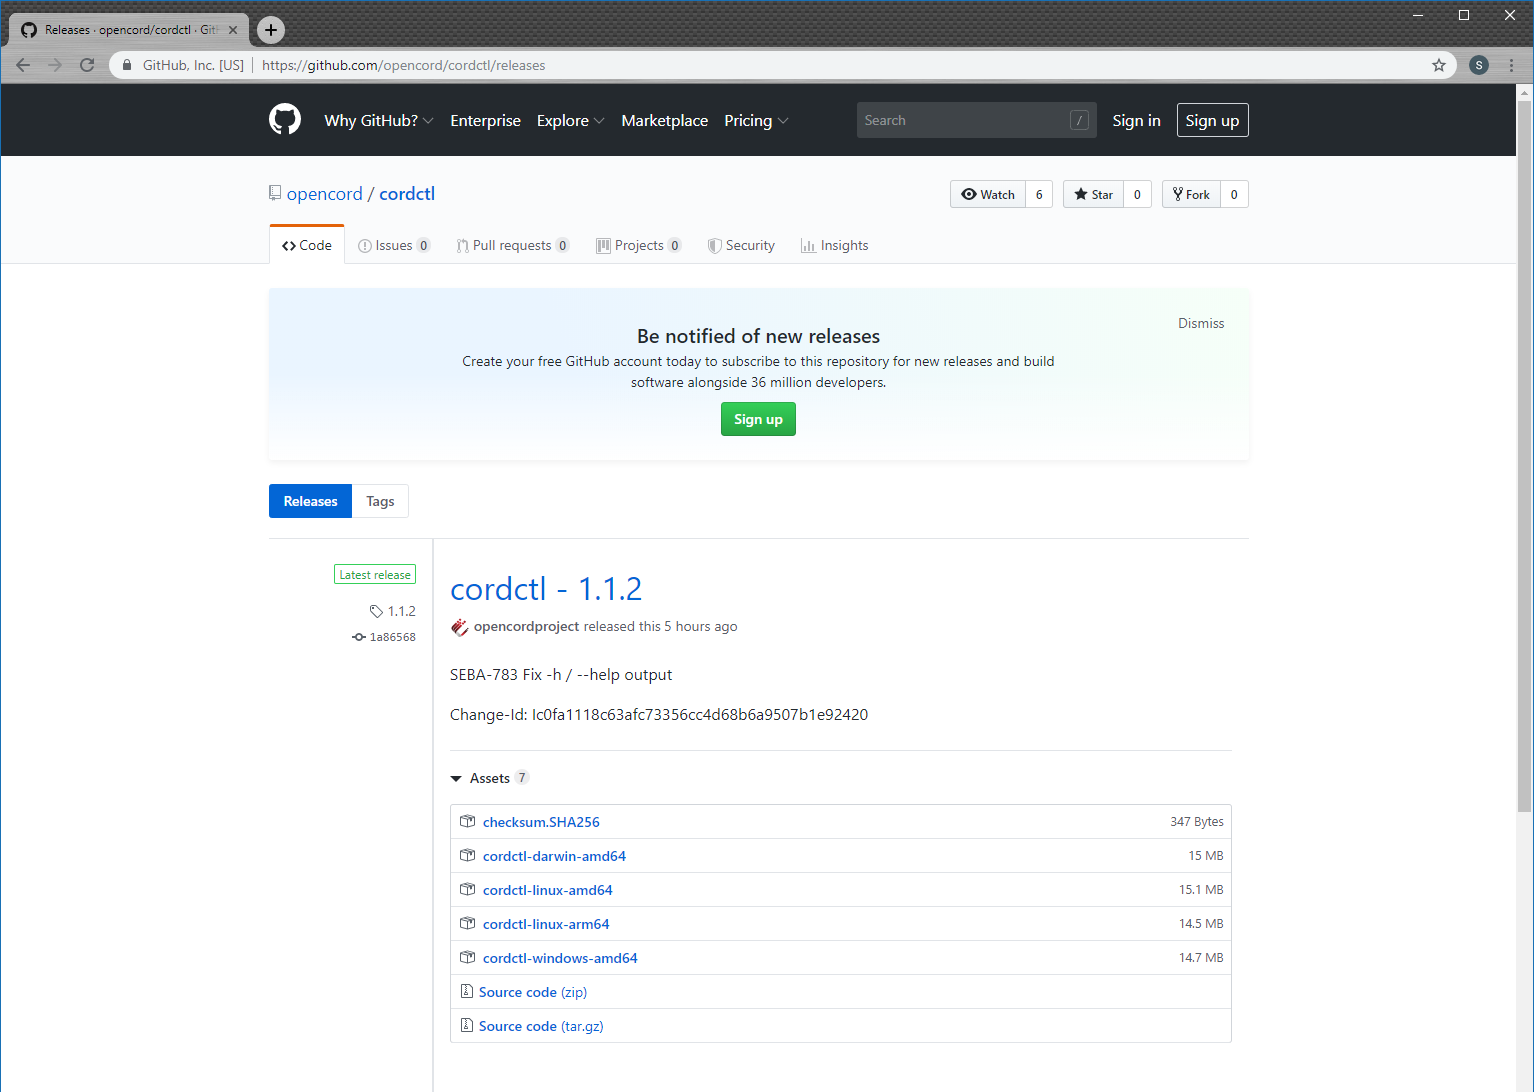 cordctl release page